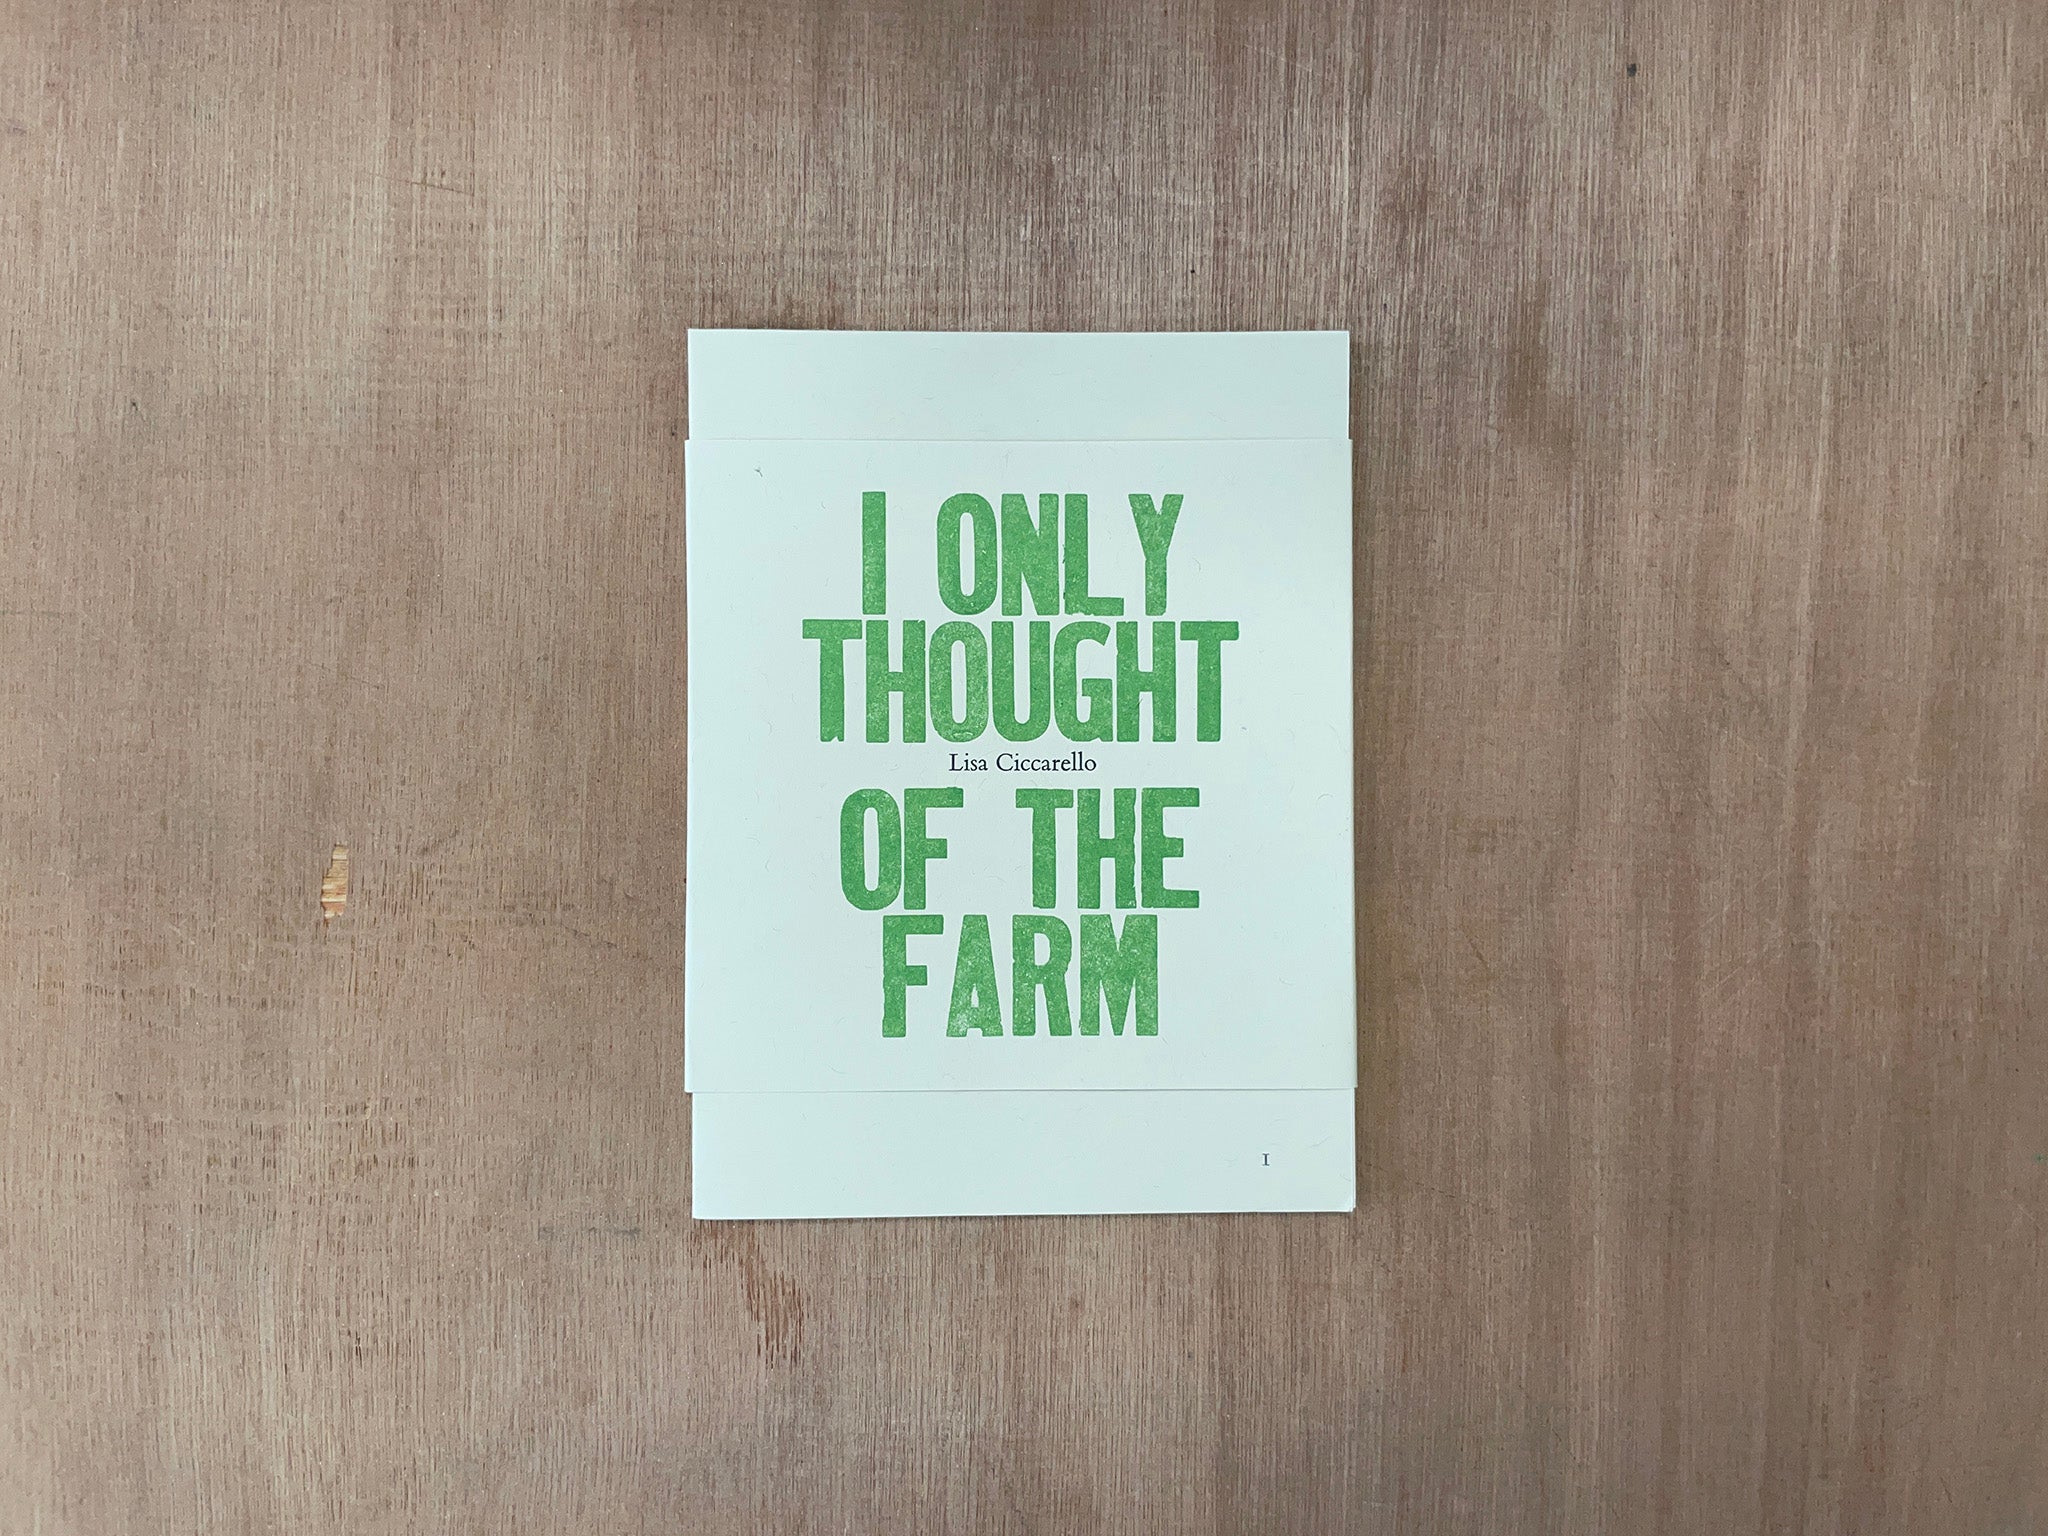 I ONLY THOUGHT OF THE FARM by Lisa Ciccarello